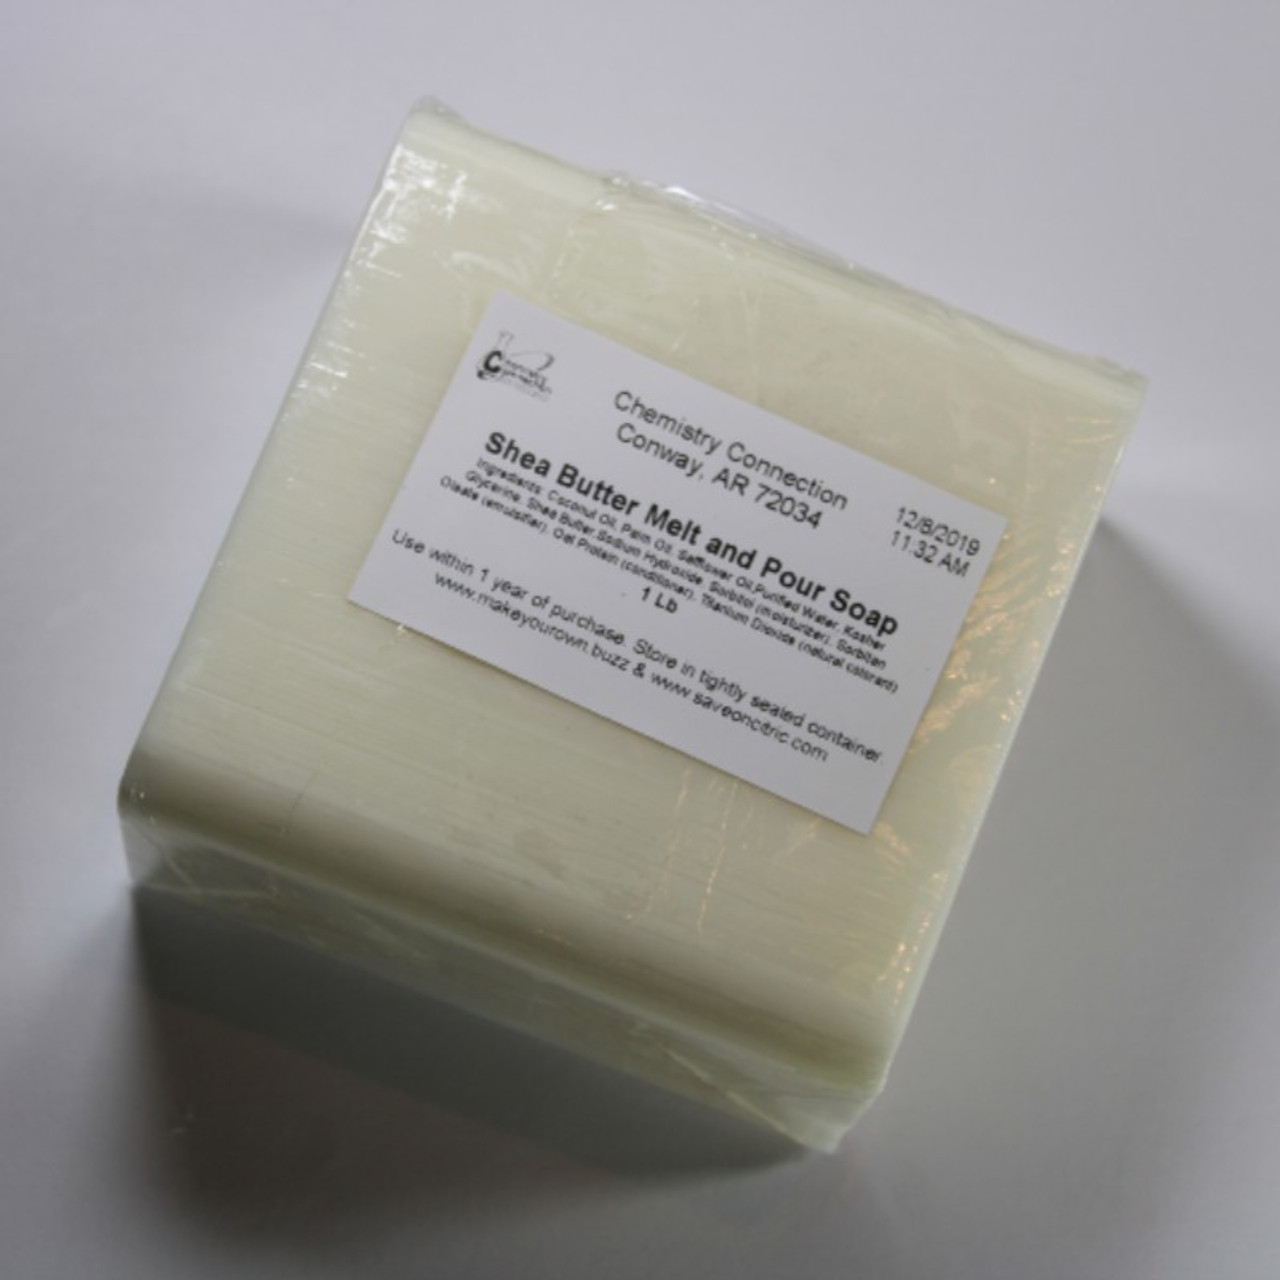 Buy Online Shea Butter Melt and Pour Soap Base - MakeYourOwn